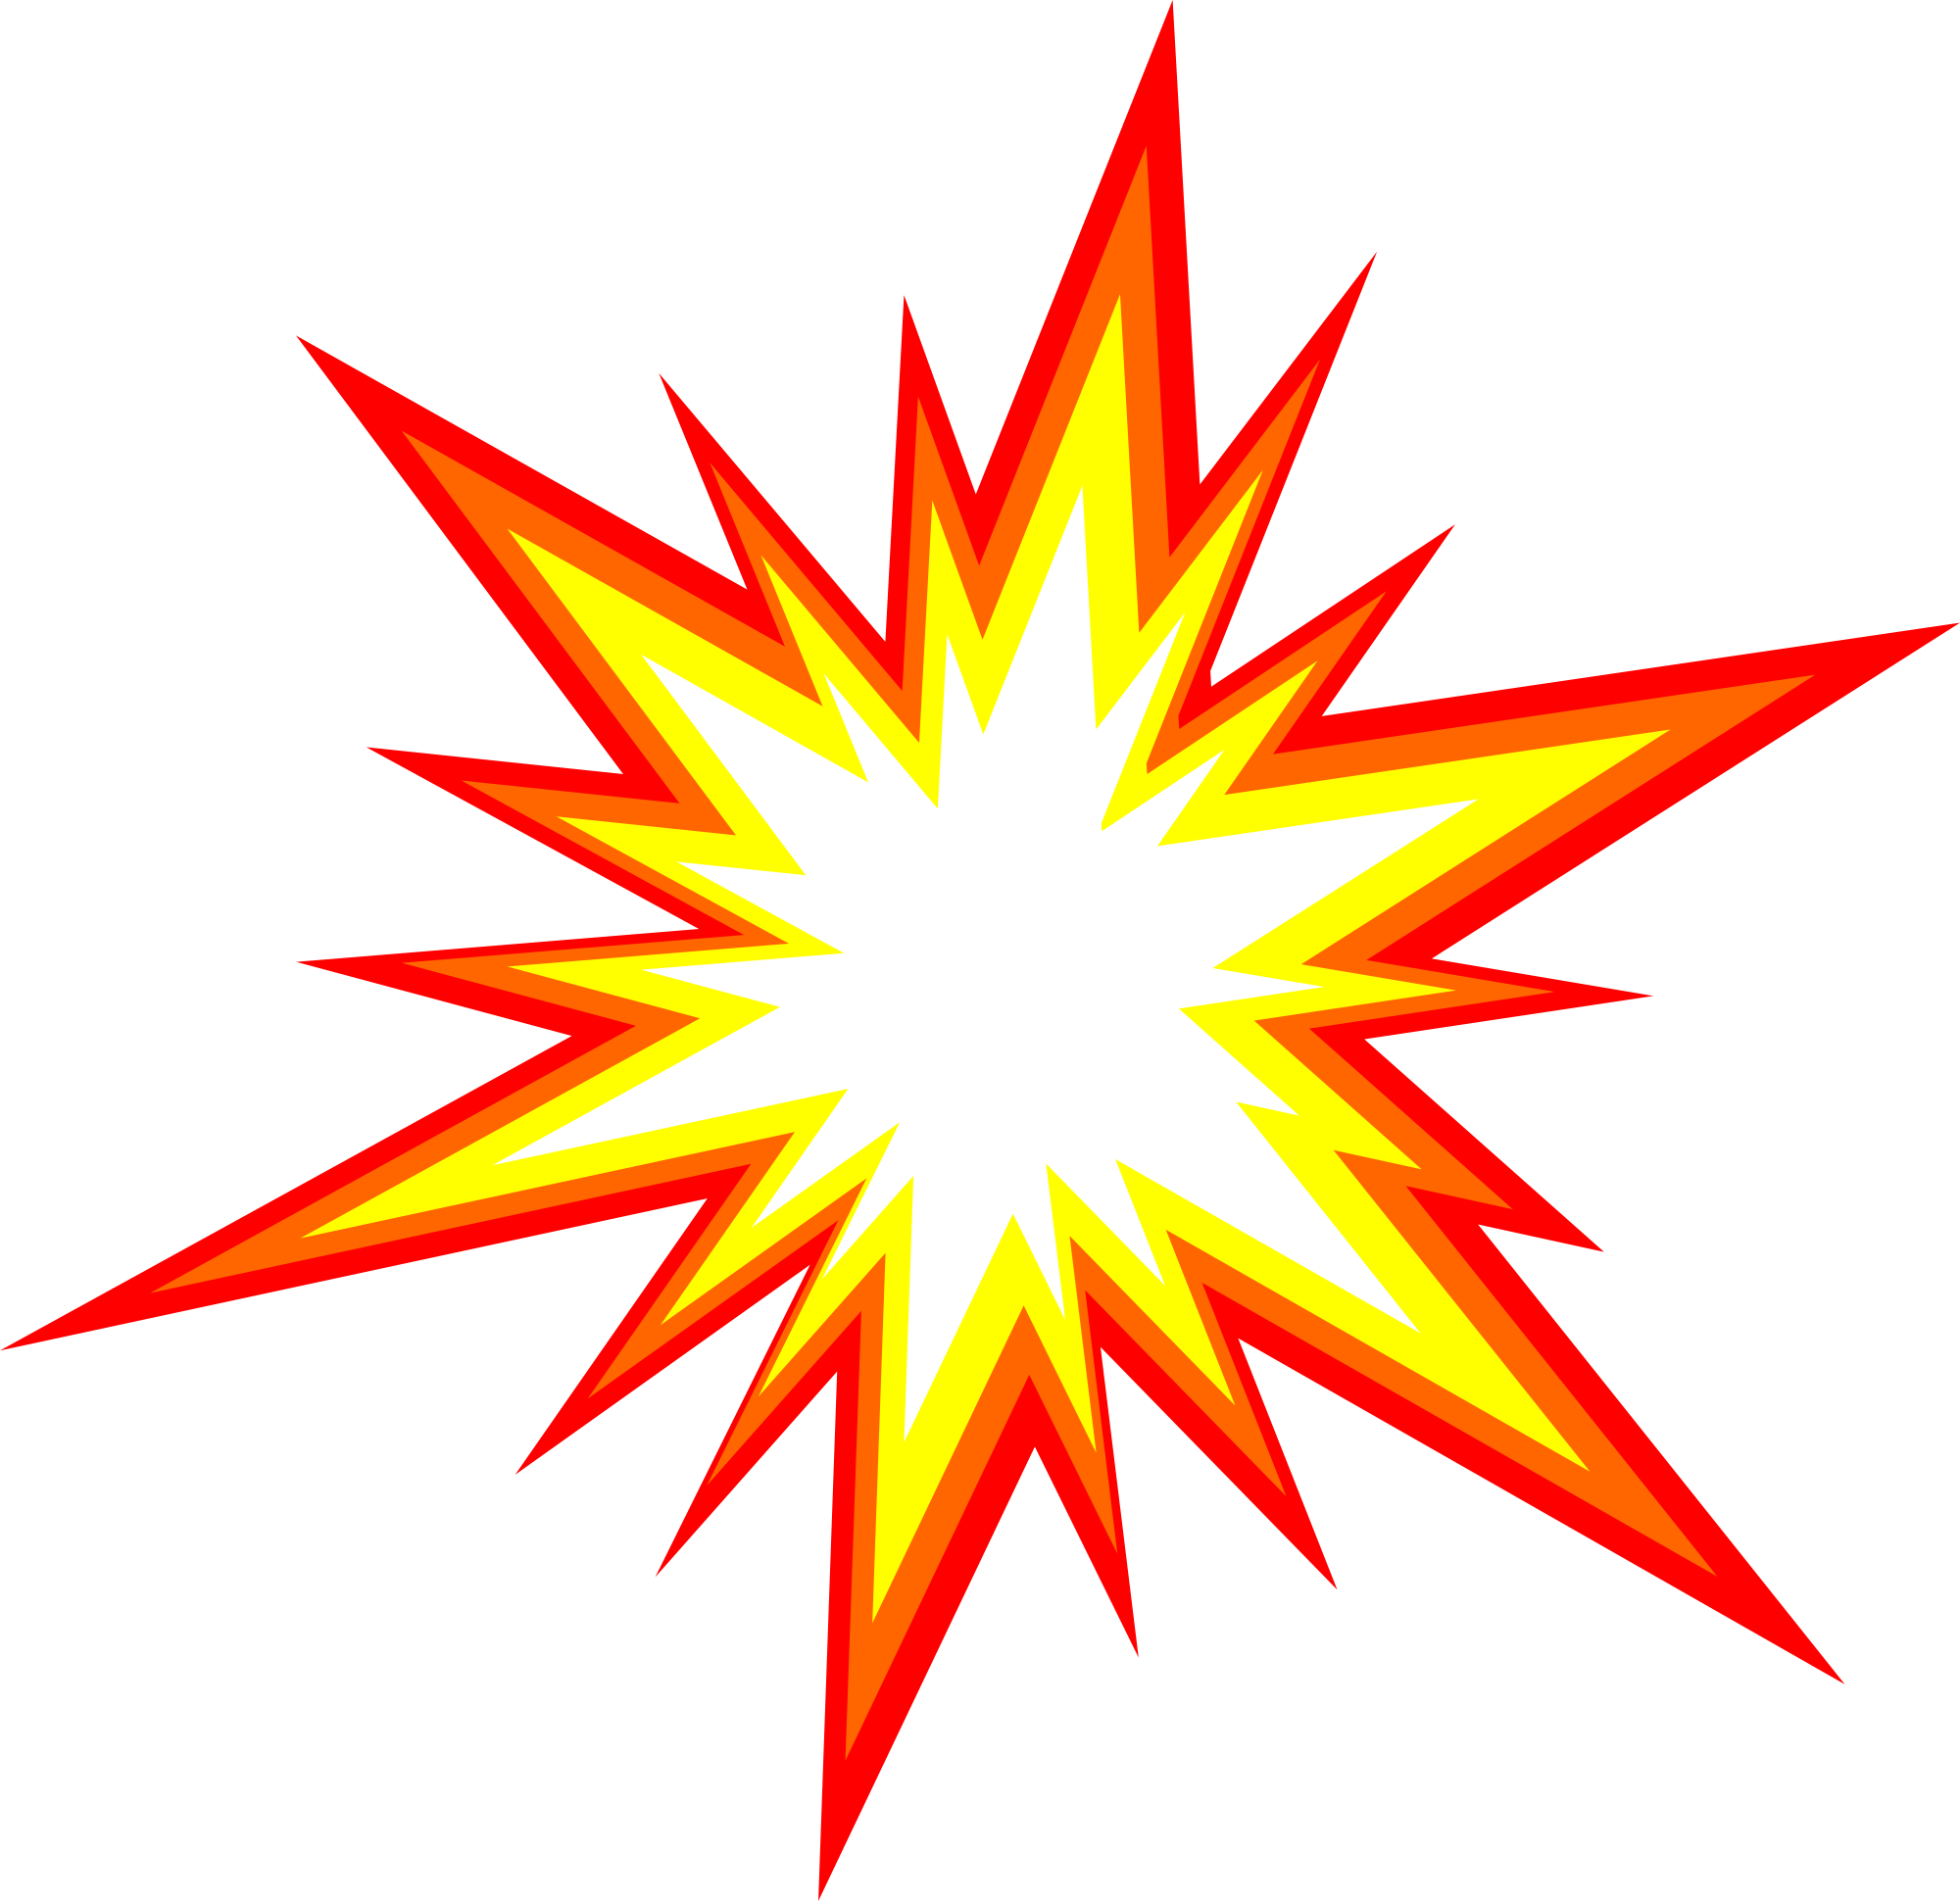 Starburst Explosion PNG HD Quality